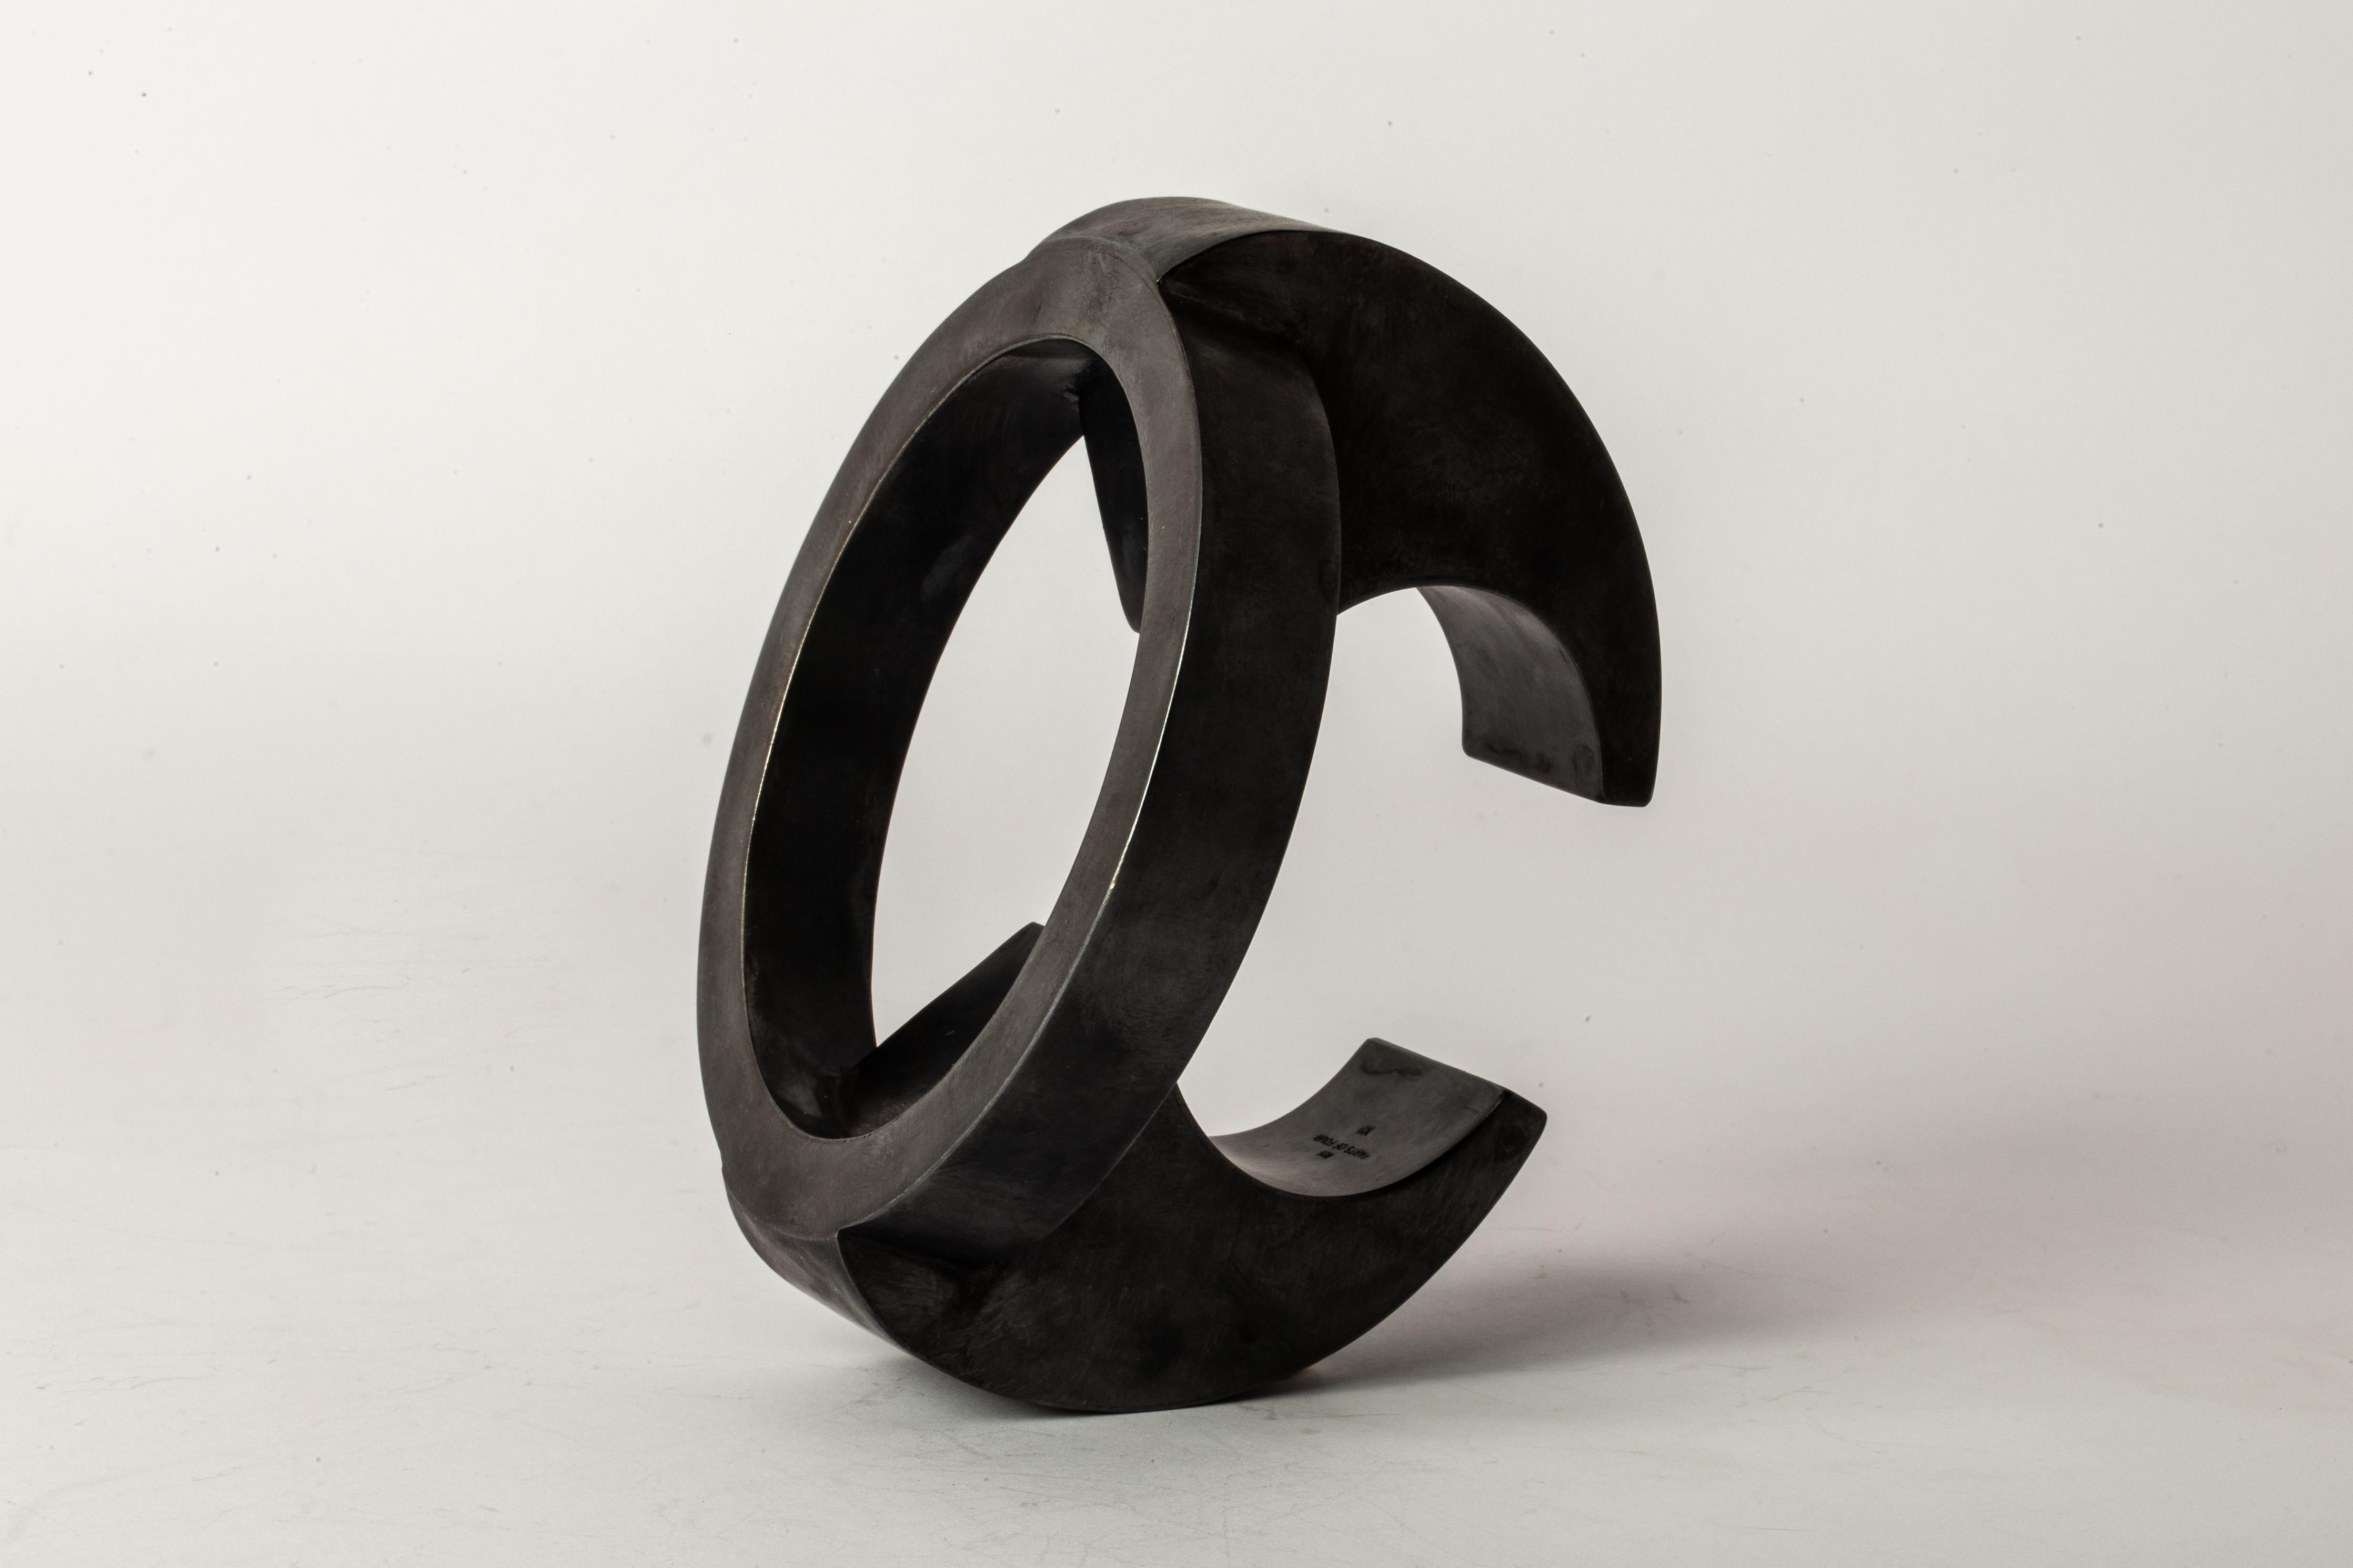 Bracelet in black sterling. Black Sterling is a surface oxidation of sterling silver. This piece is 100% hand fabricated from metal plate; cut into sections and soldered together to make the hollow three dimensional form.
Diameter of Bracelet Top :